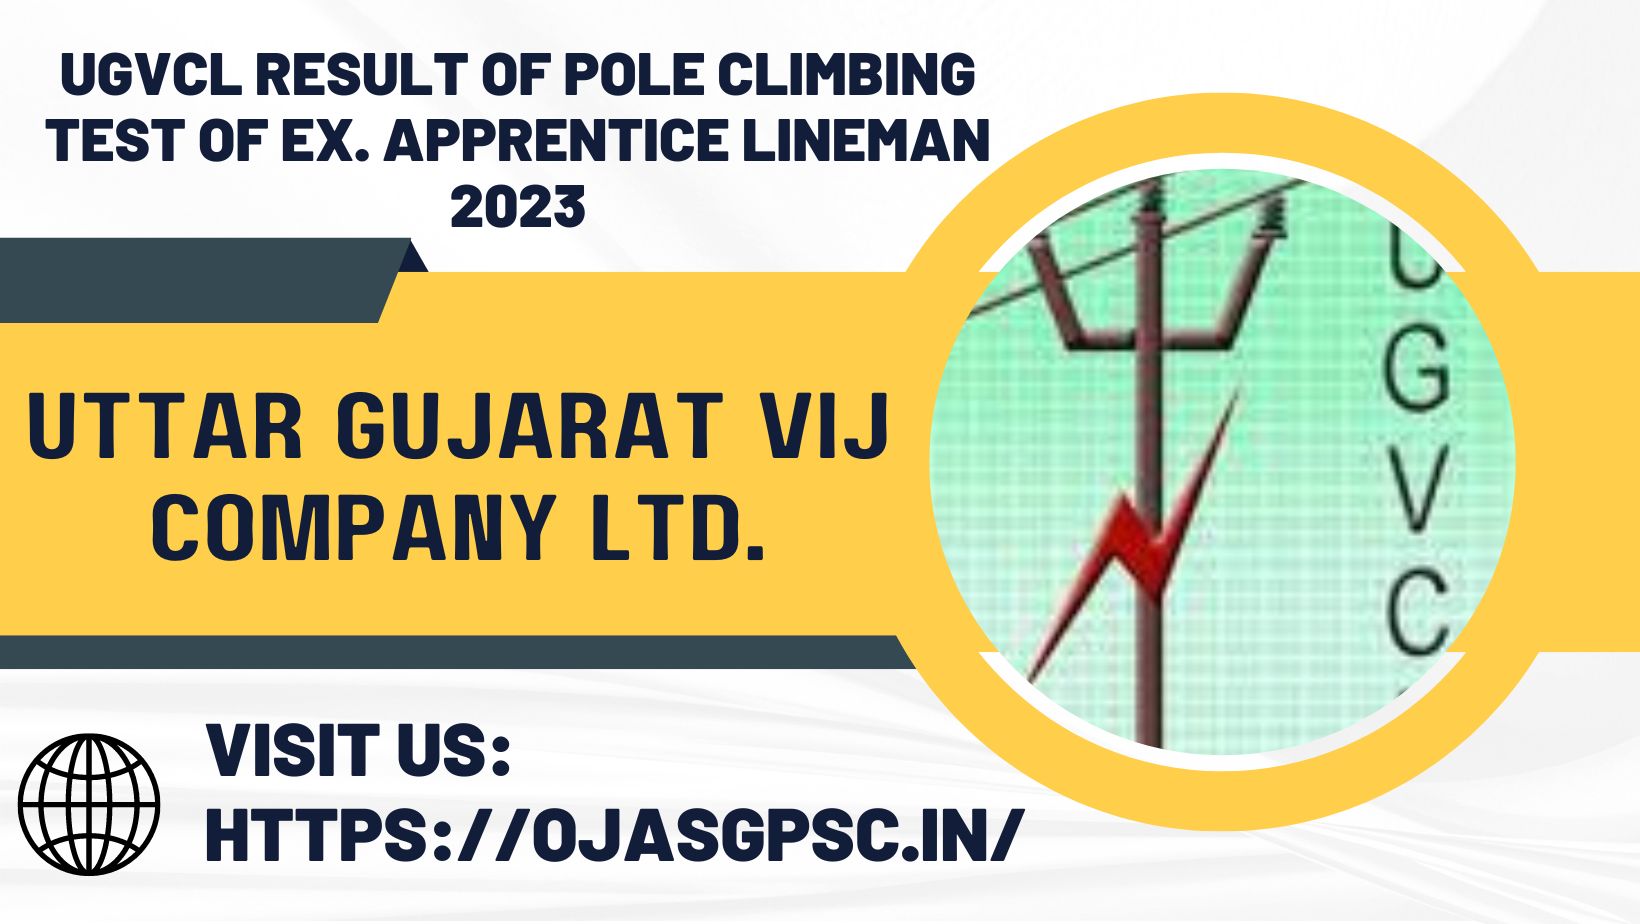 UGVCL Result of Pole Climbing Test of Ex. Apprentice Lineman 2023